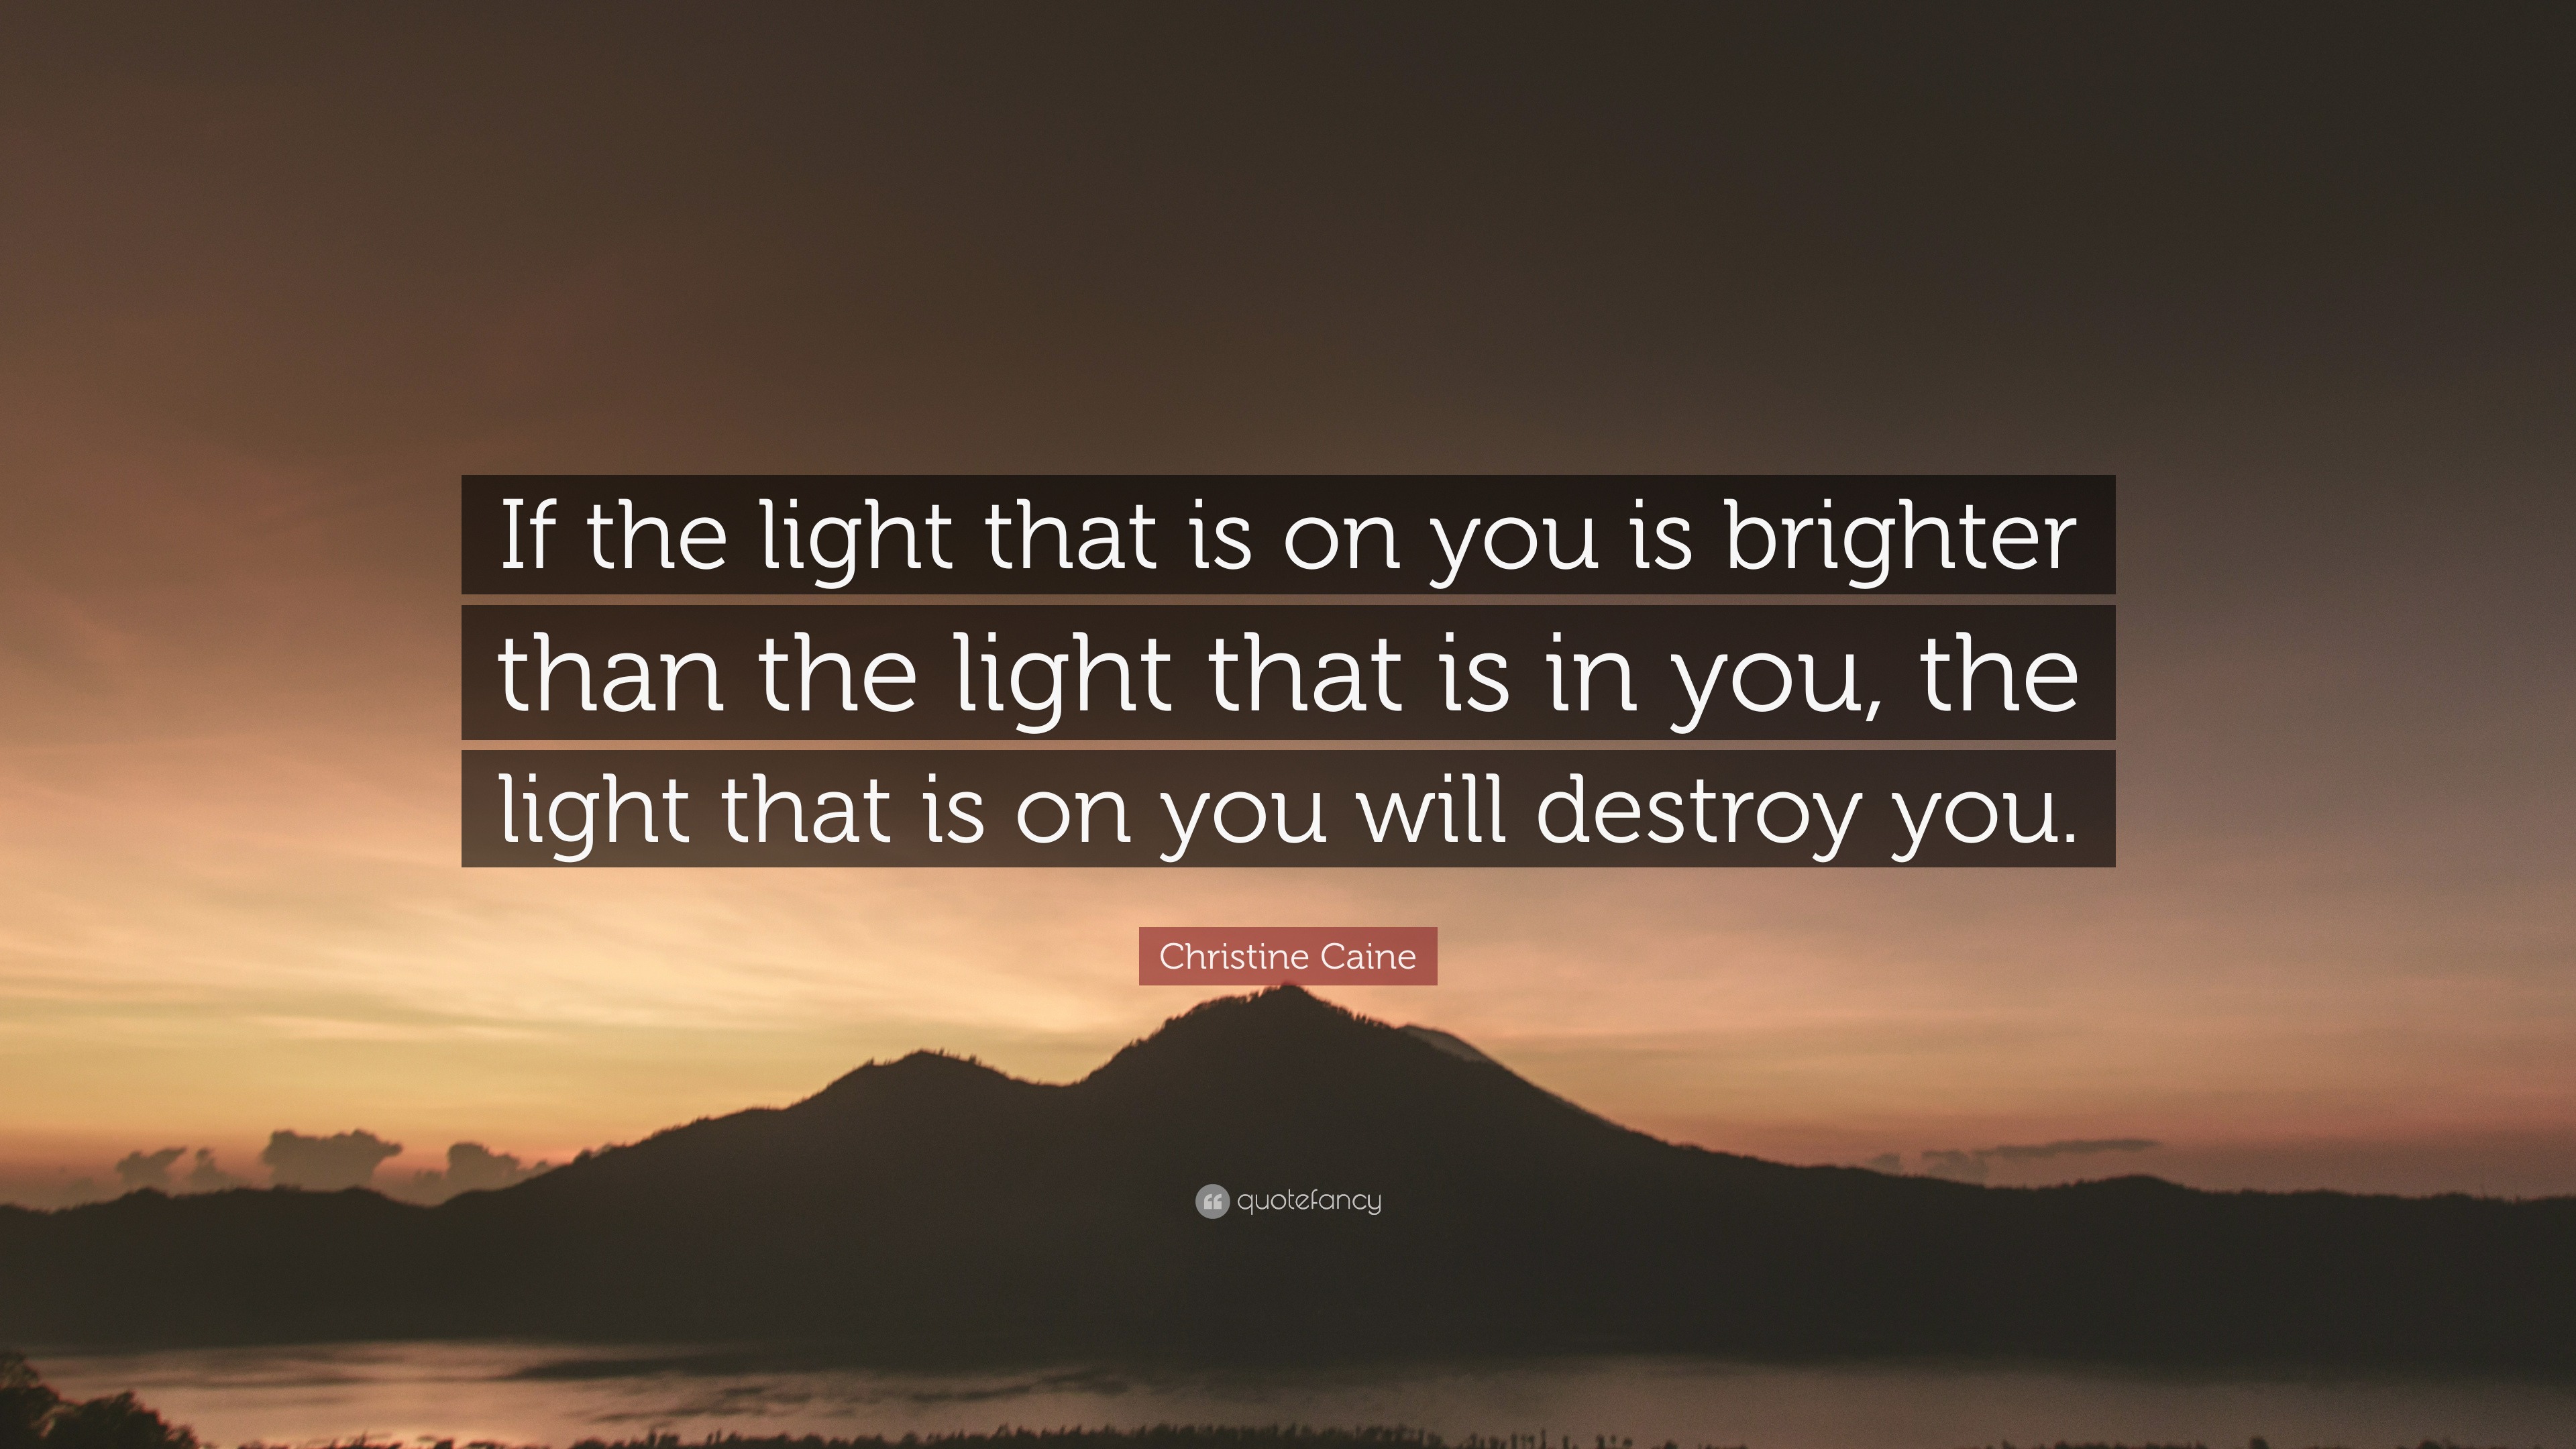 Christine Caine Quote: “If the light that is on you is brighter than ...